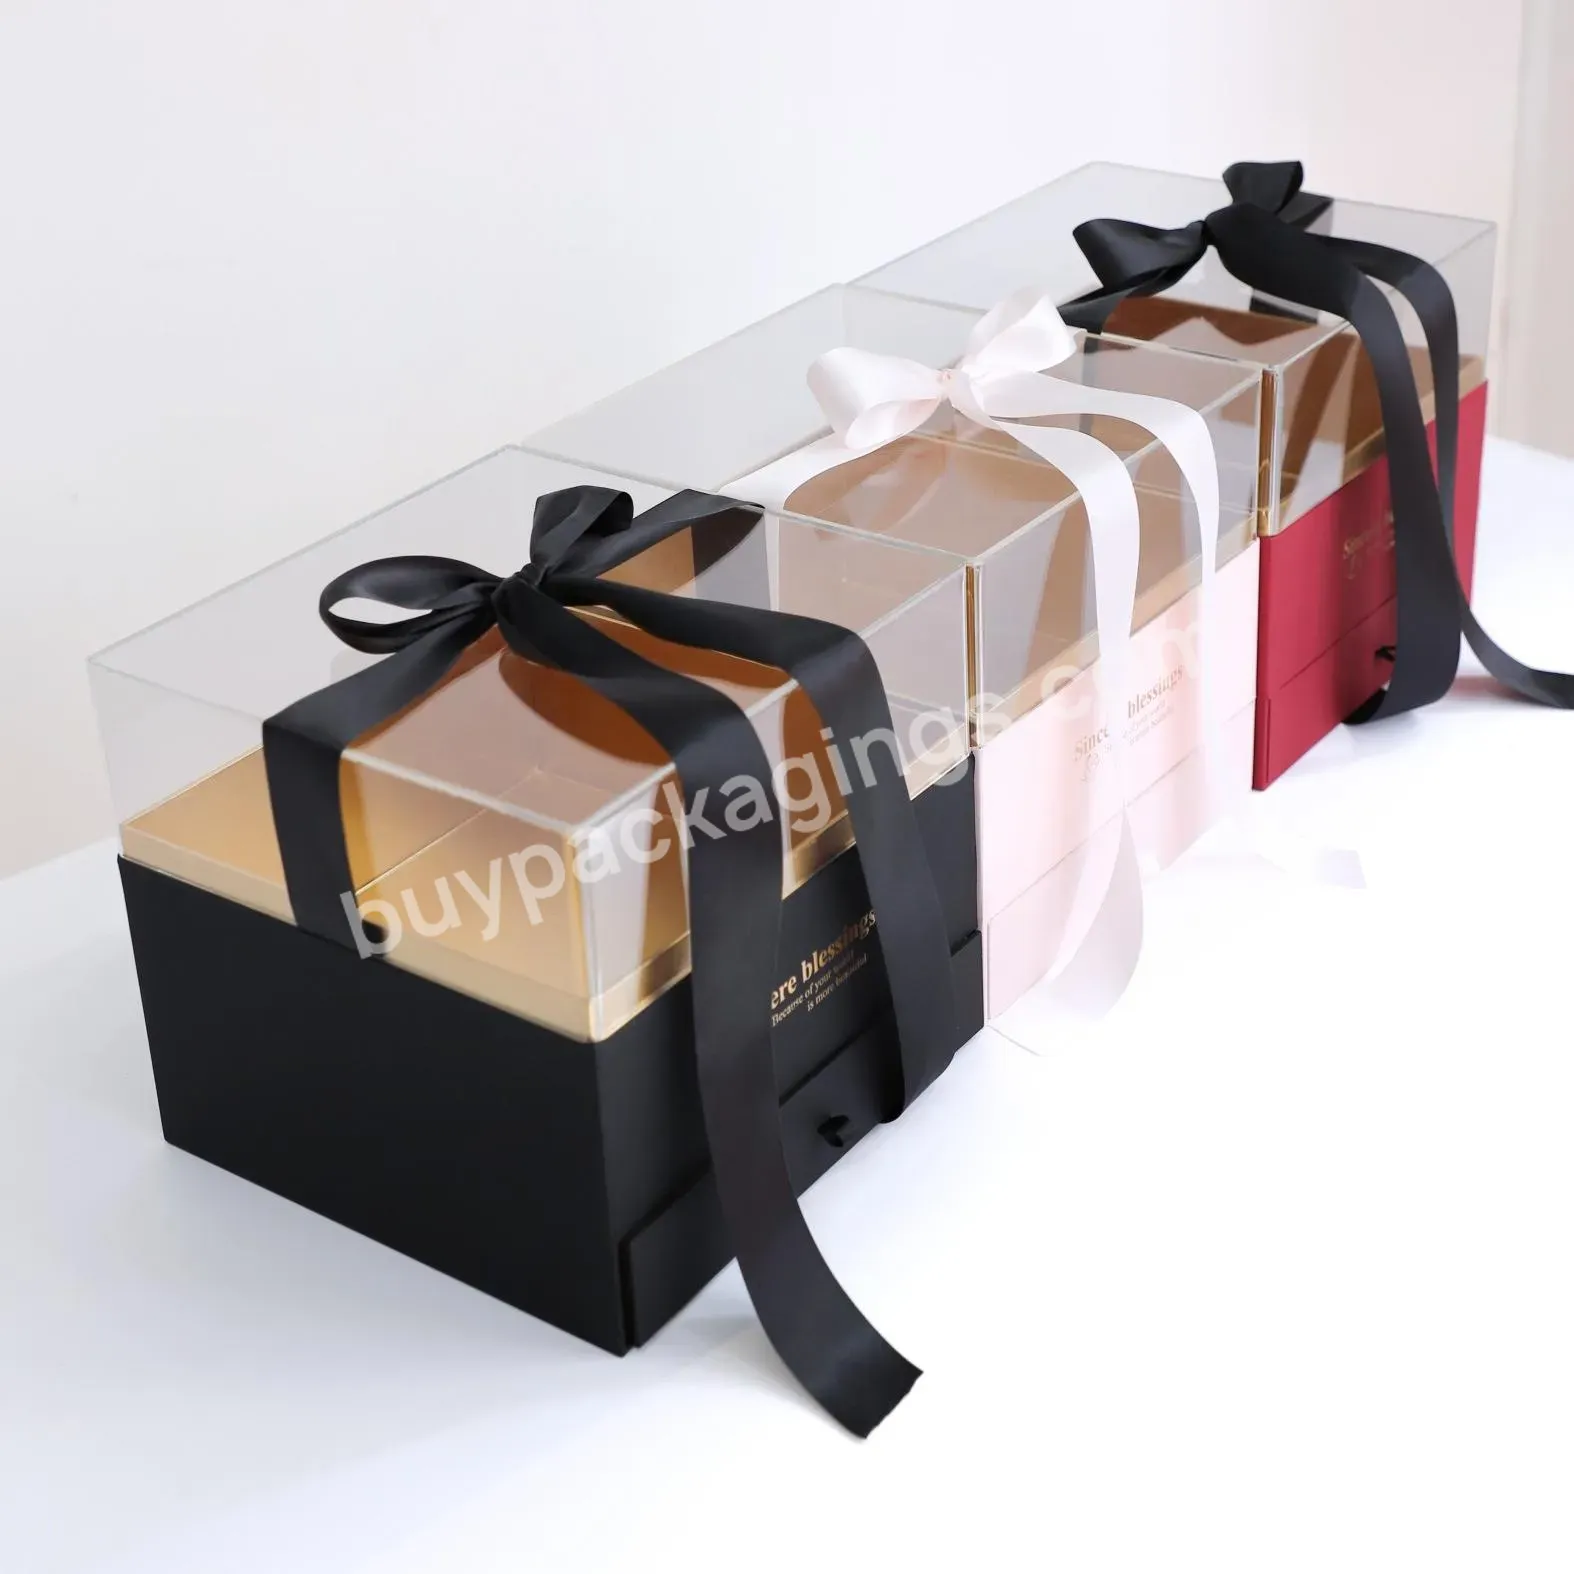 Elegant Square Flower Gift Box Acrylic Cover Box With Drawer Design Polyester Ribbon - Buy Square Flower Gift Box,Acrylic Cover Box,Acrylic Cover Box With Drawer Design Polyester Ribbon.